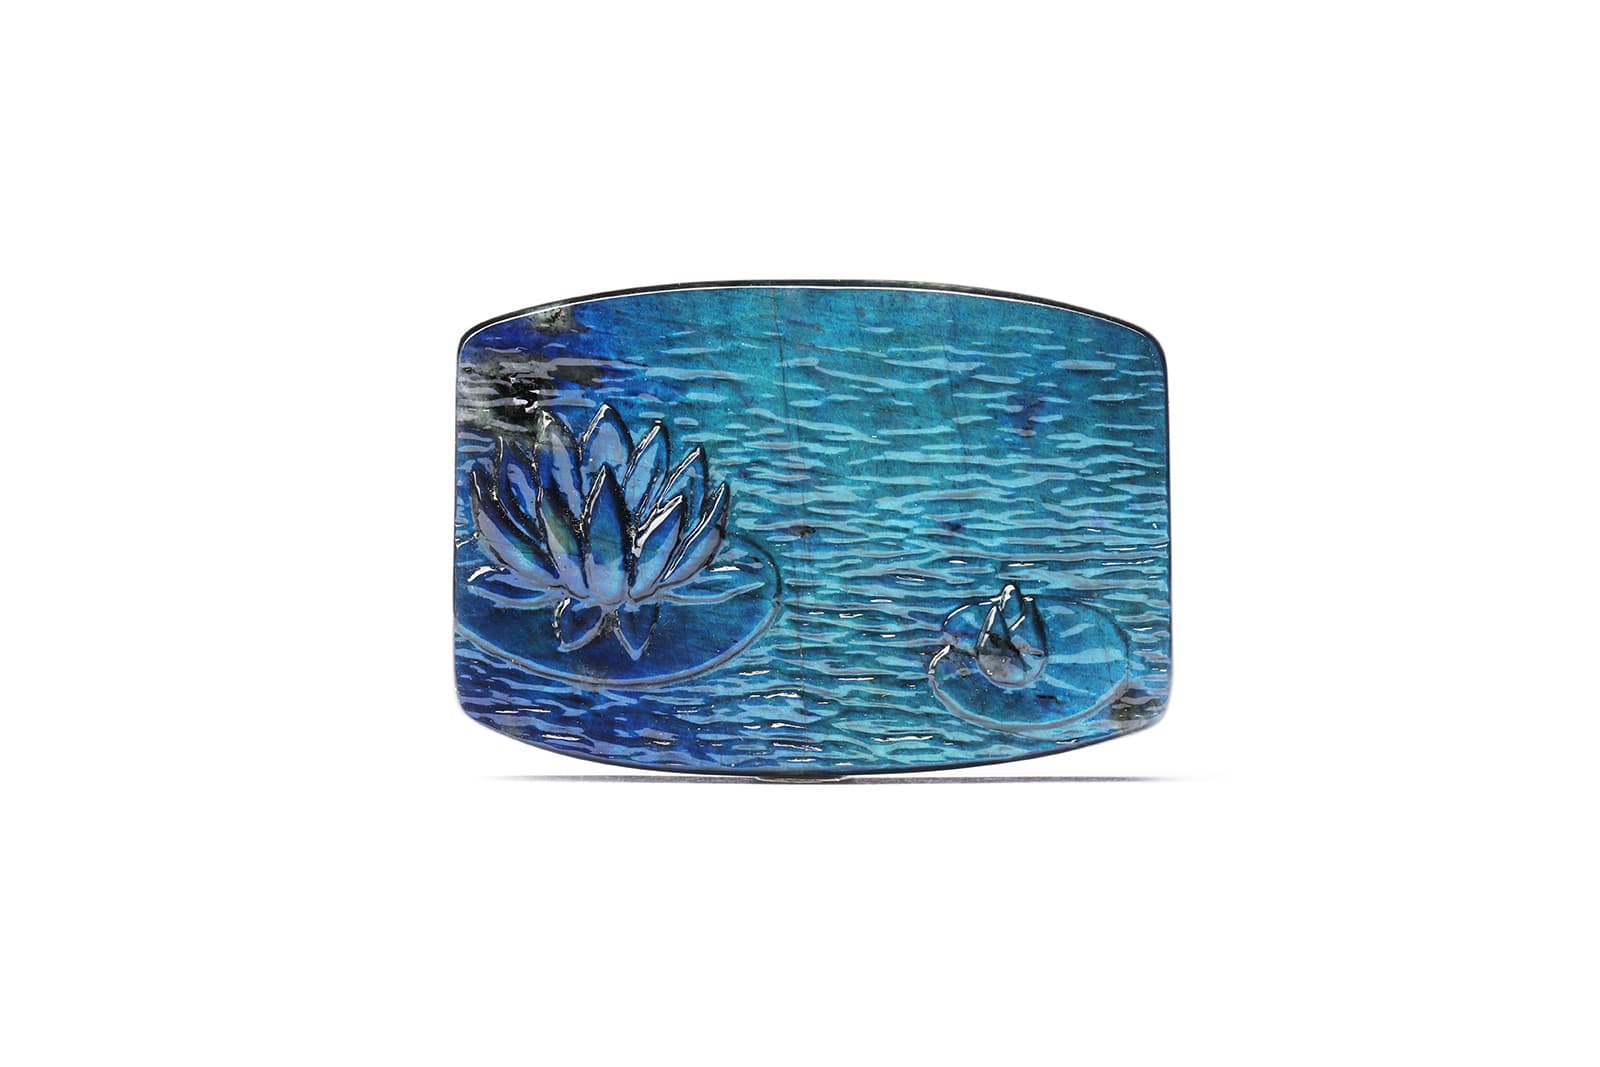 Pauly Claude Monet-inspired carved spectrolite gemstone from the Old Masters Collection 